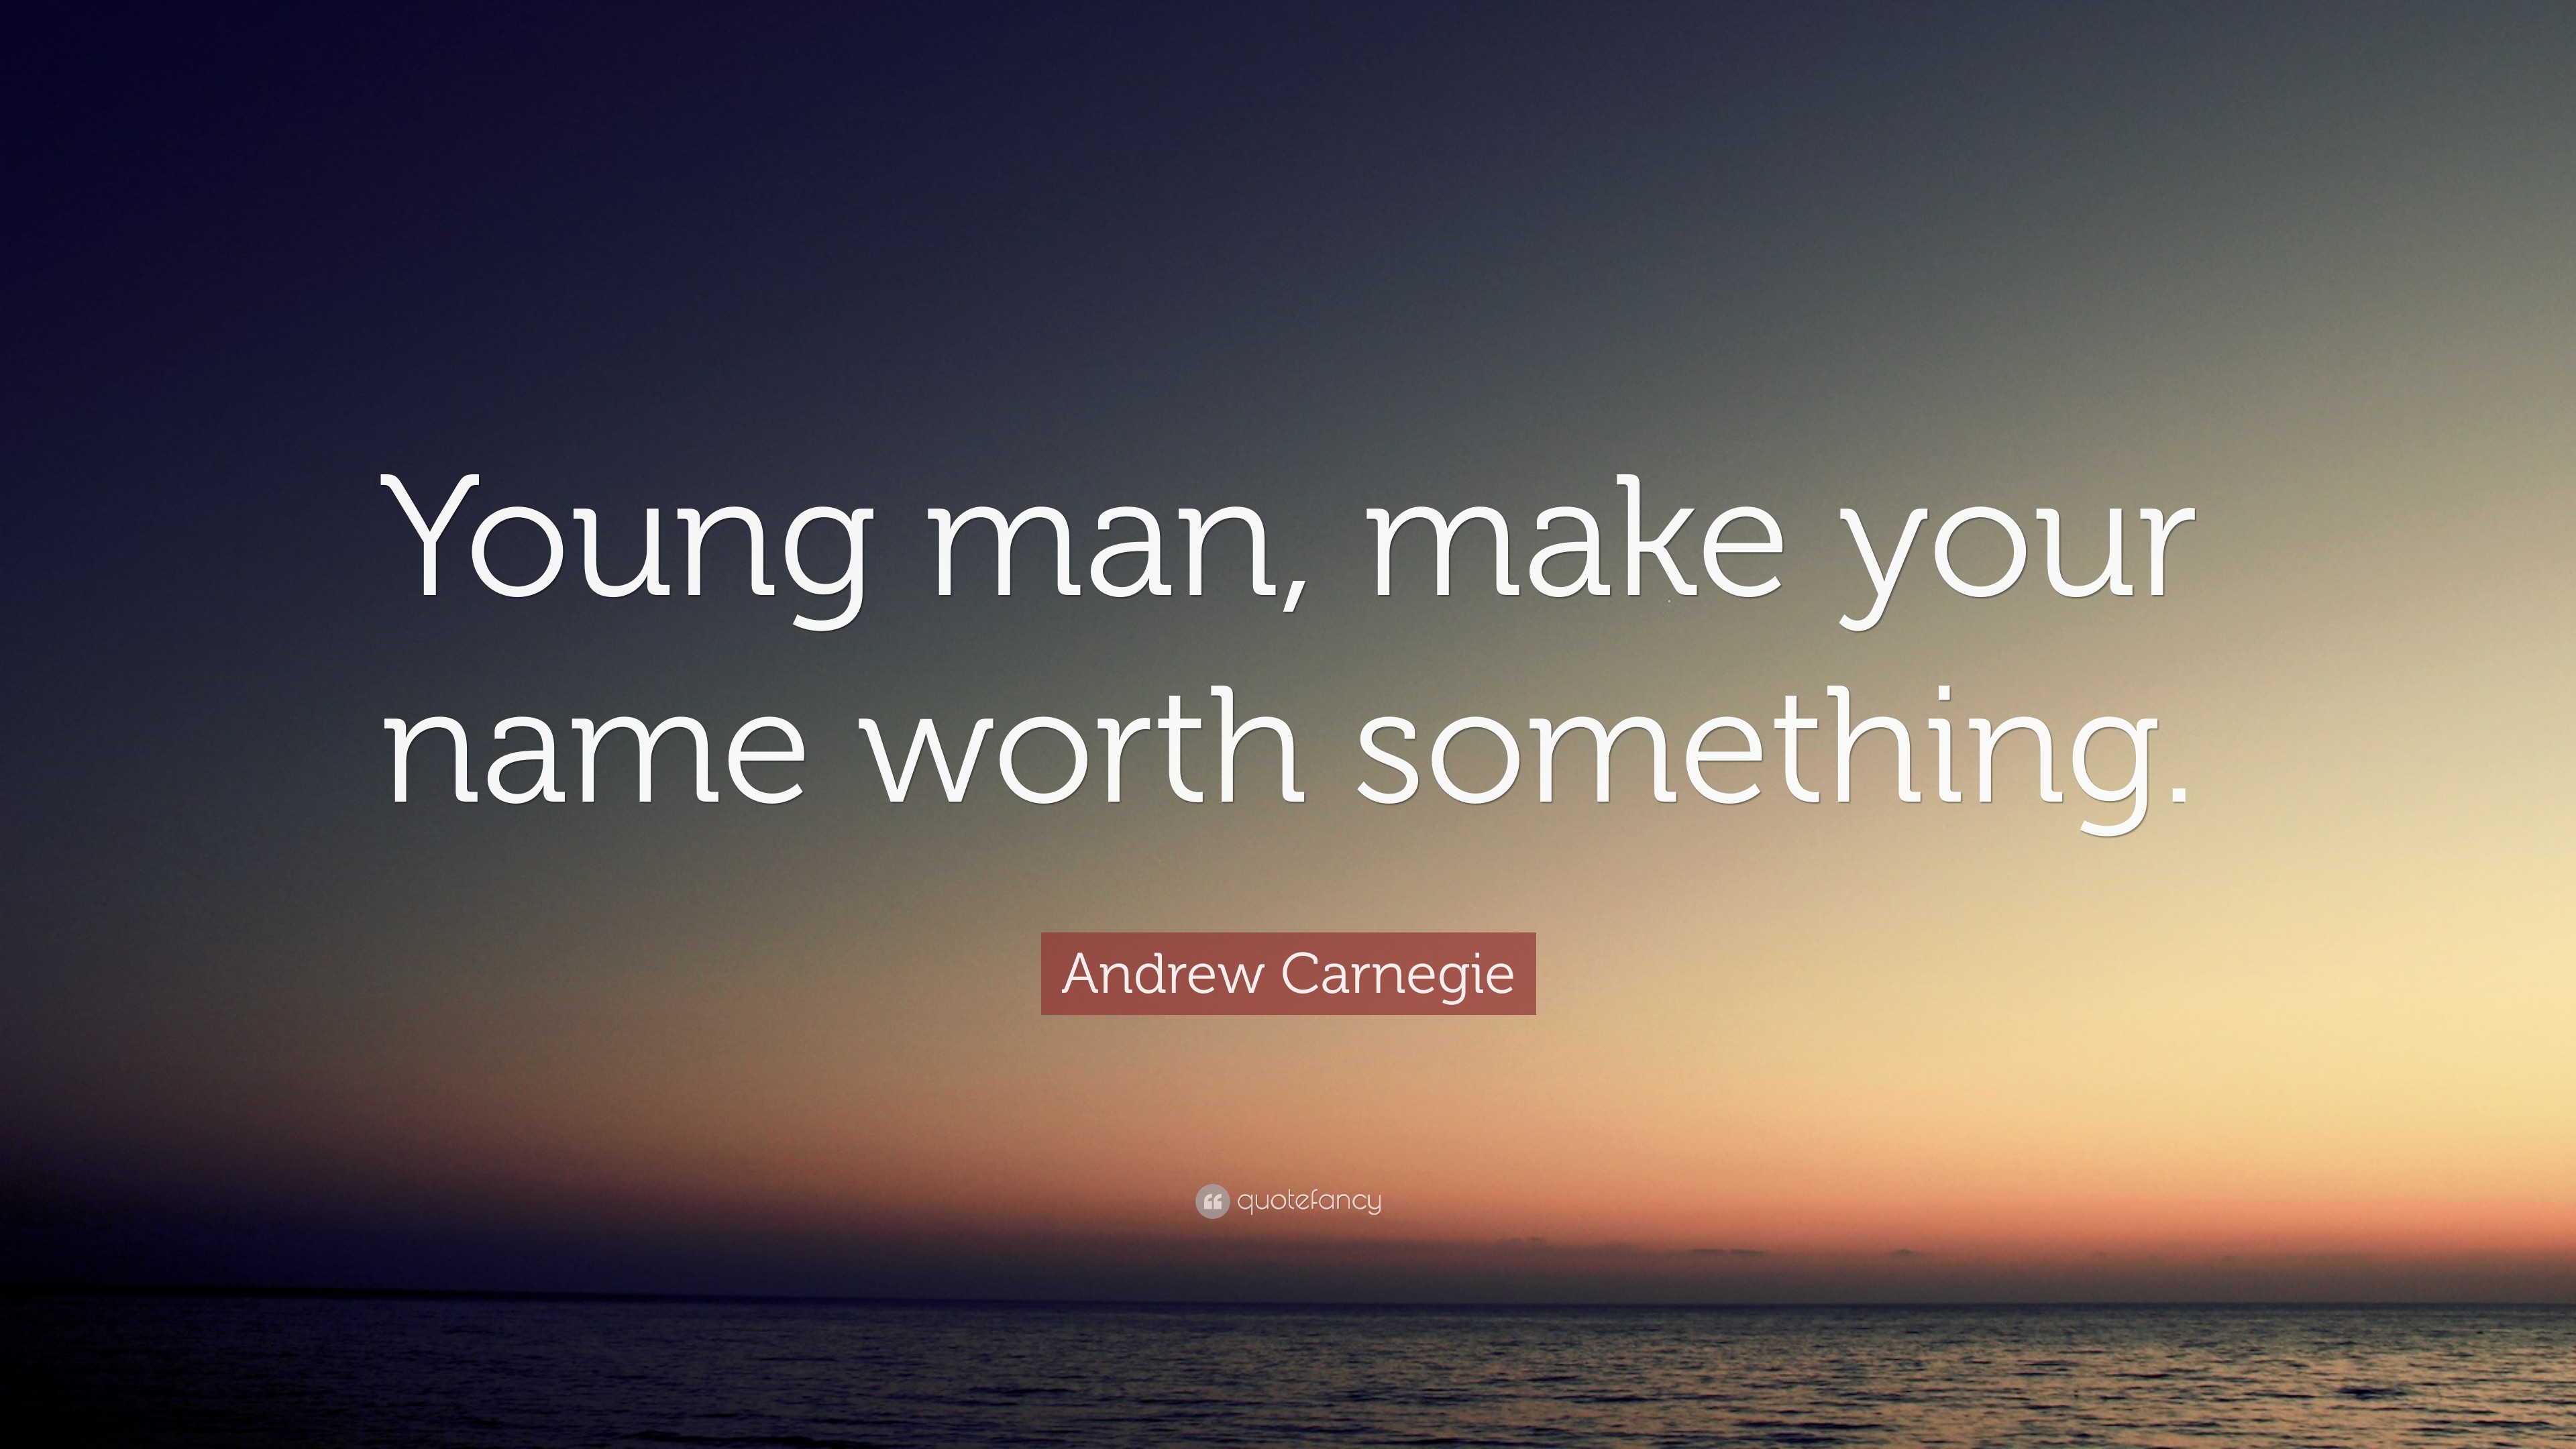 3840x2160 Andrew Carnegie Quote: “Young man, make your name worth something.”